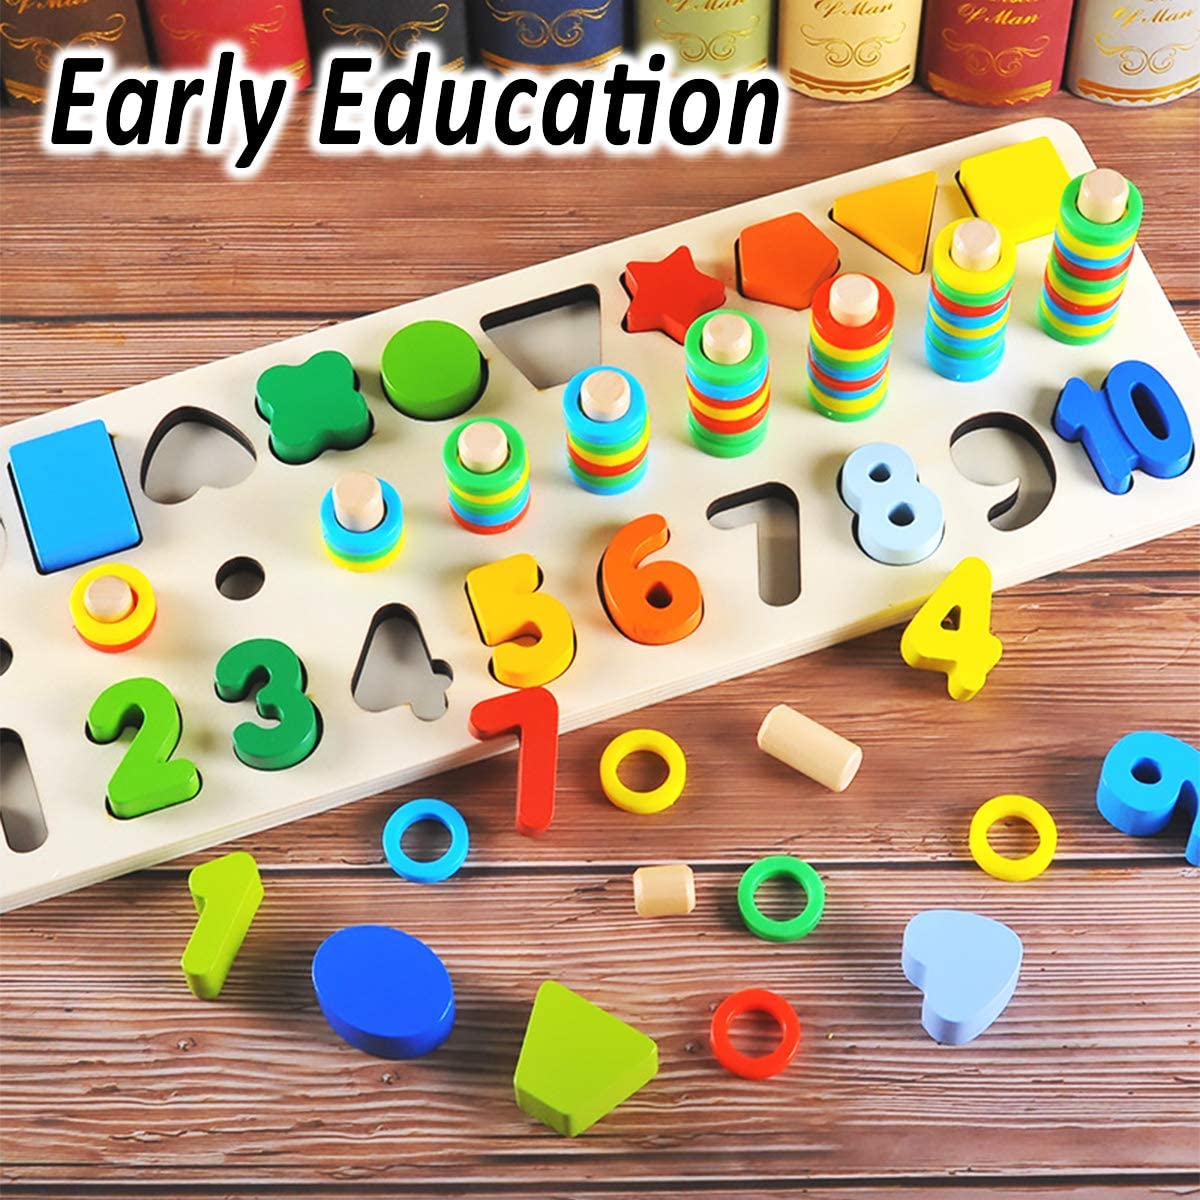 Toddlers - Shape Sorter Counting Game for Wooden Number Puzzle Sorting Montessori Toys for Age 3 4 5 Year olds Kids - Preschool Education Math Stacking Block Learning Wood Chunky Jigsaw - image 2 of 6